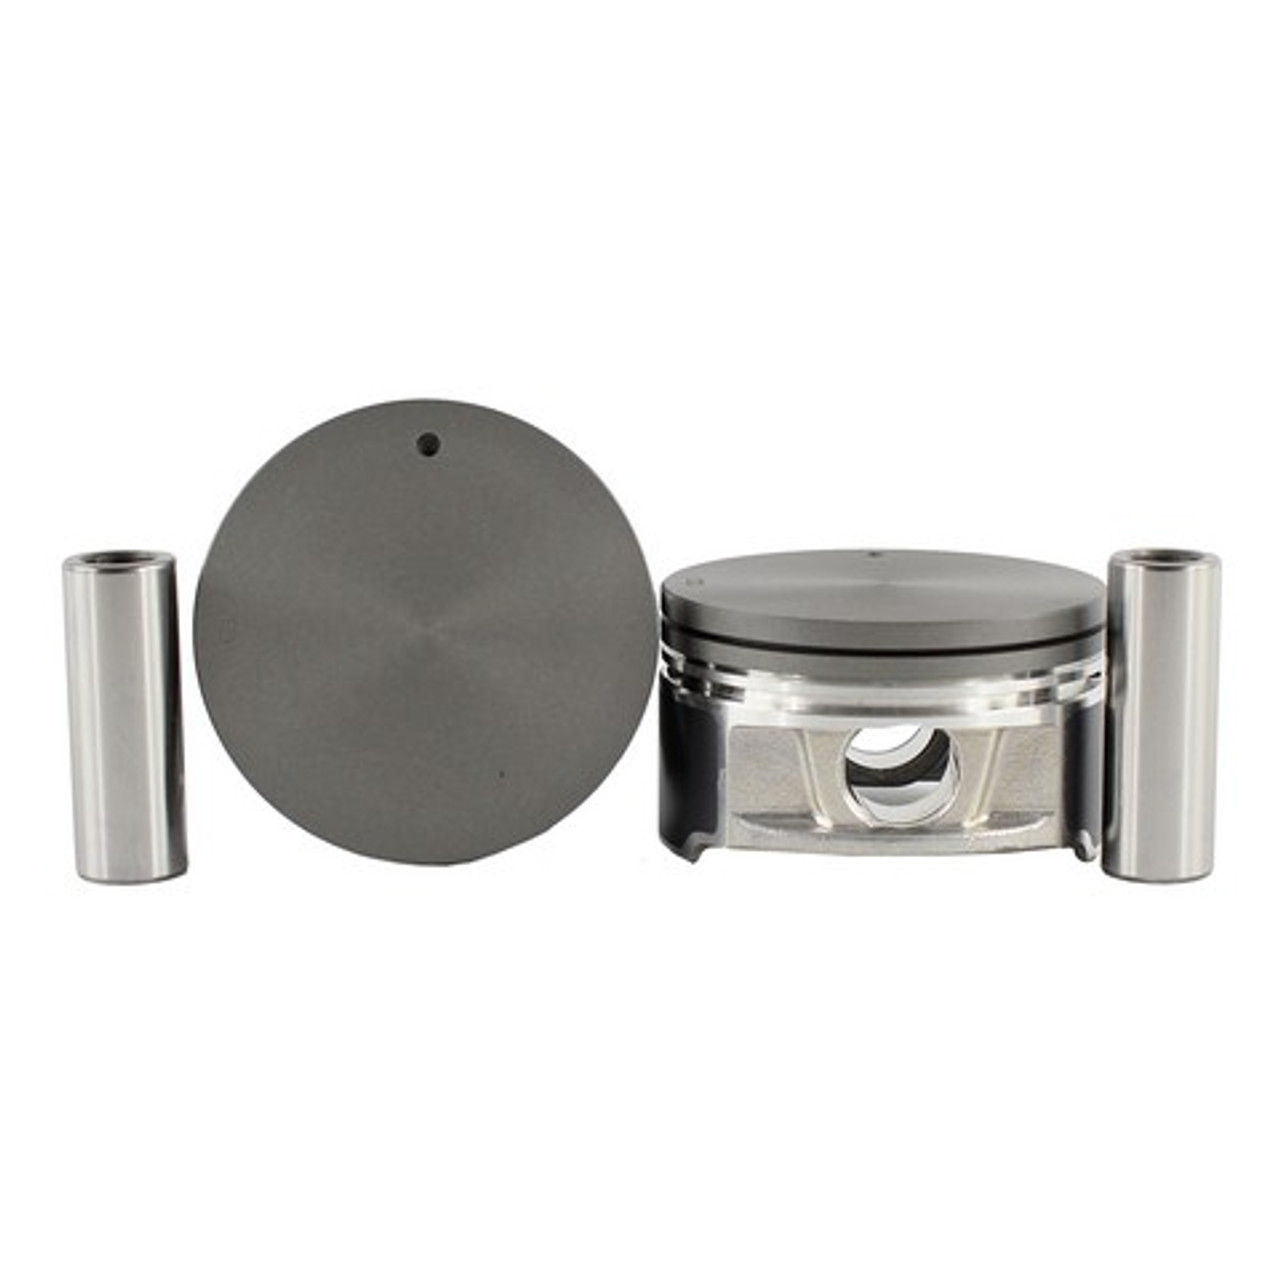 Piston Set 5.4L 2008 Ford Expedition - P4172.28